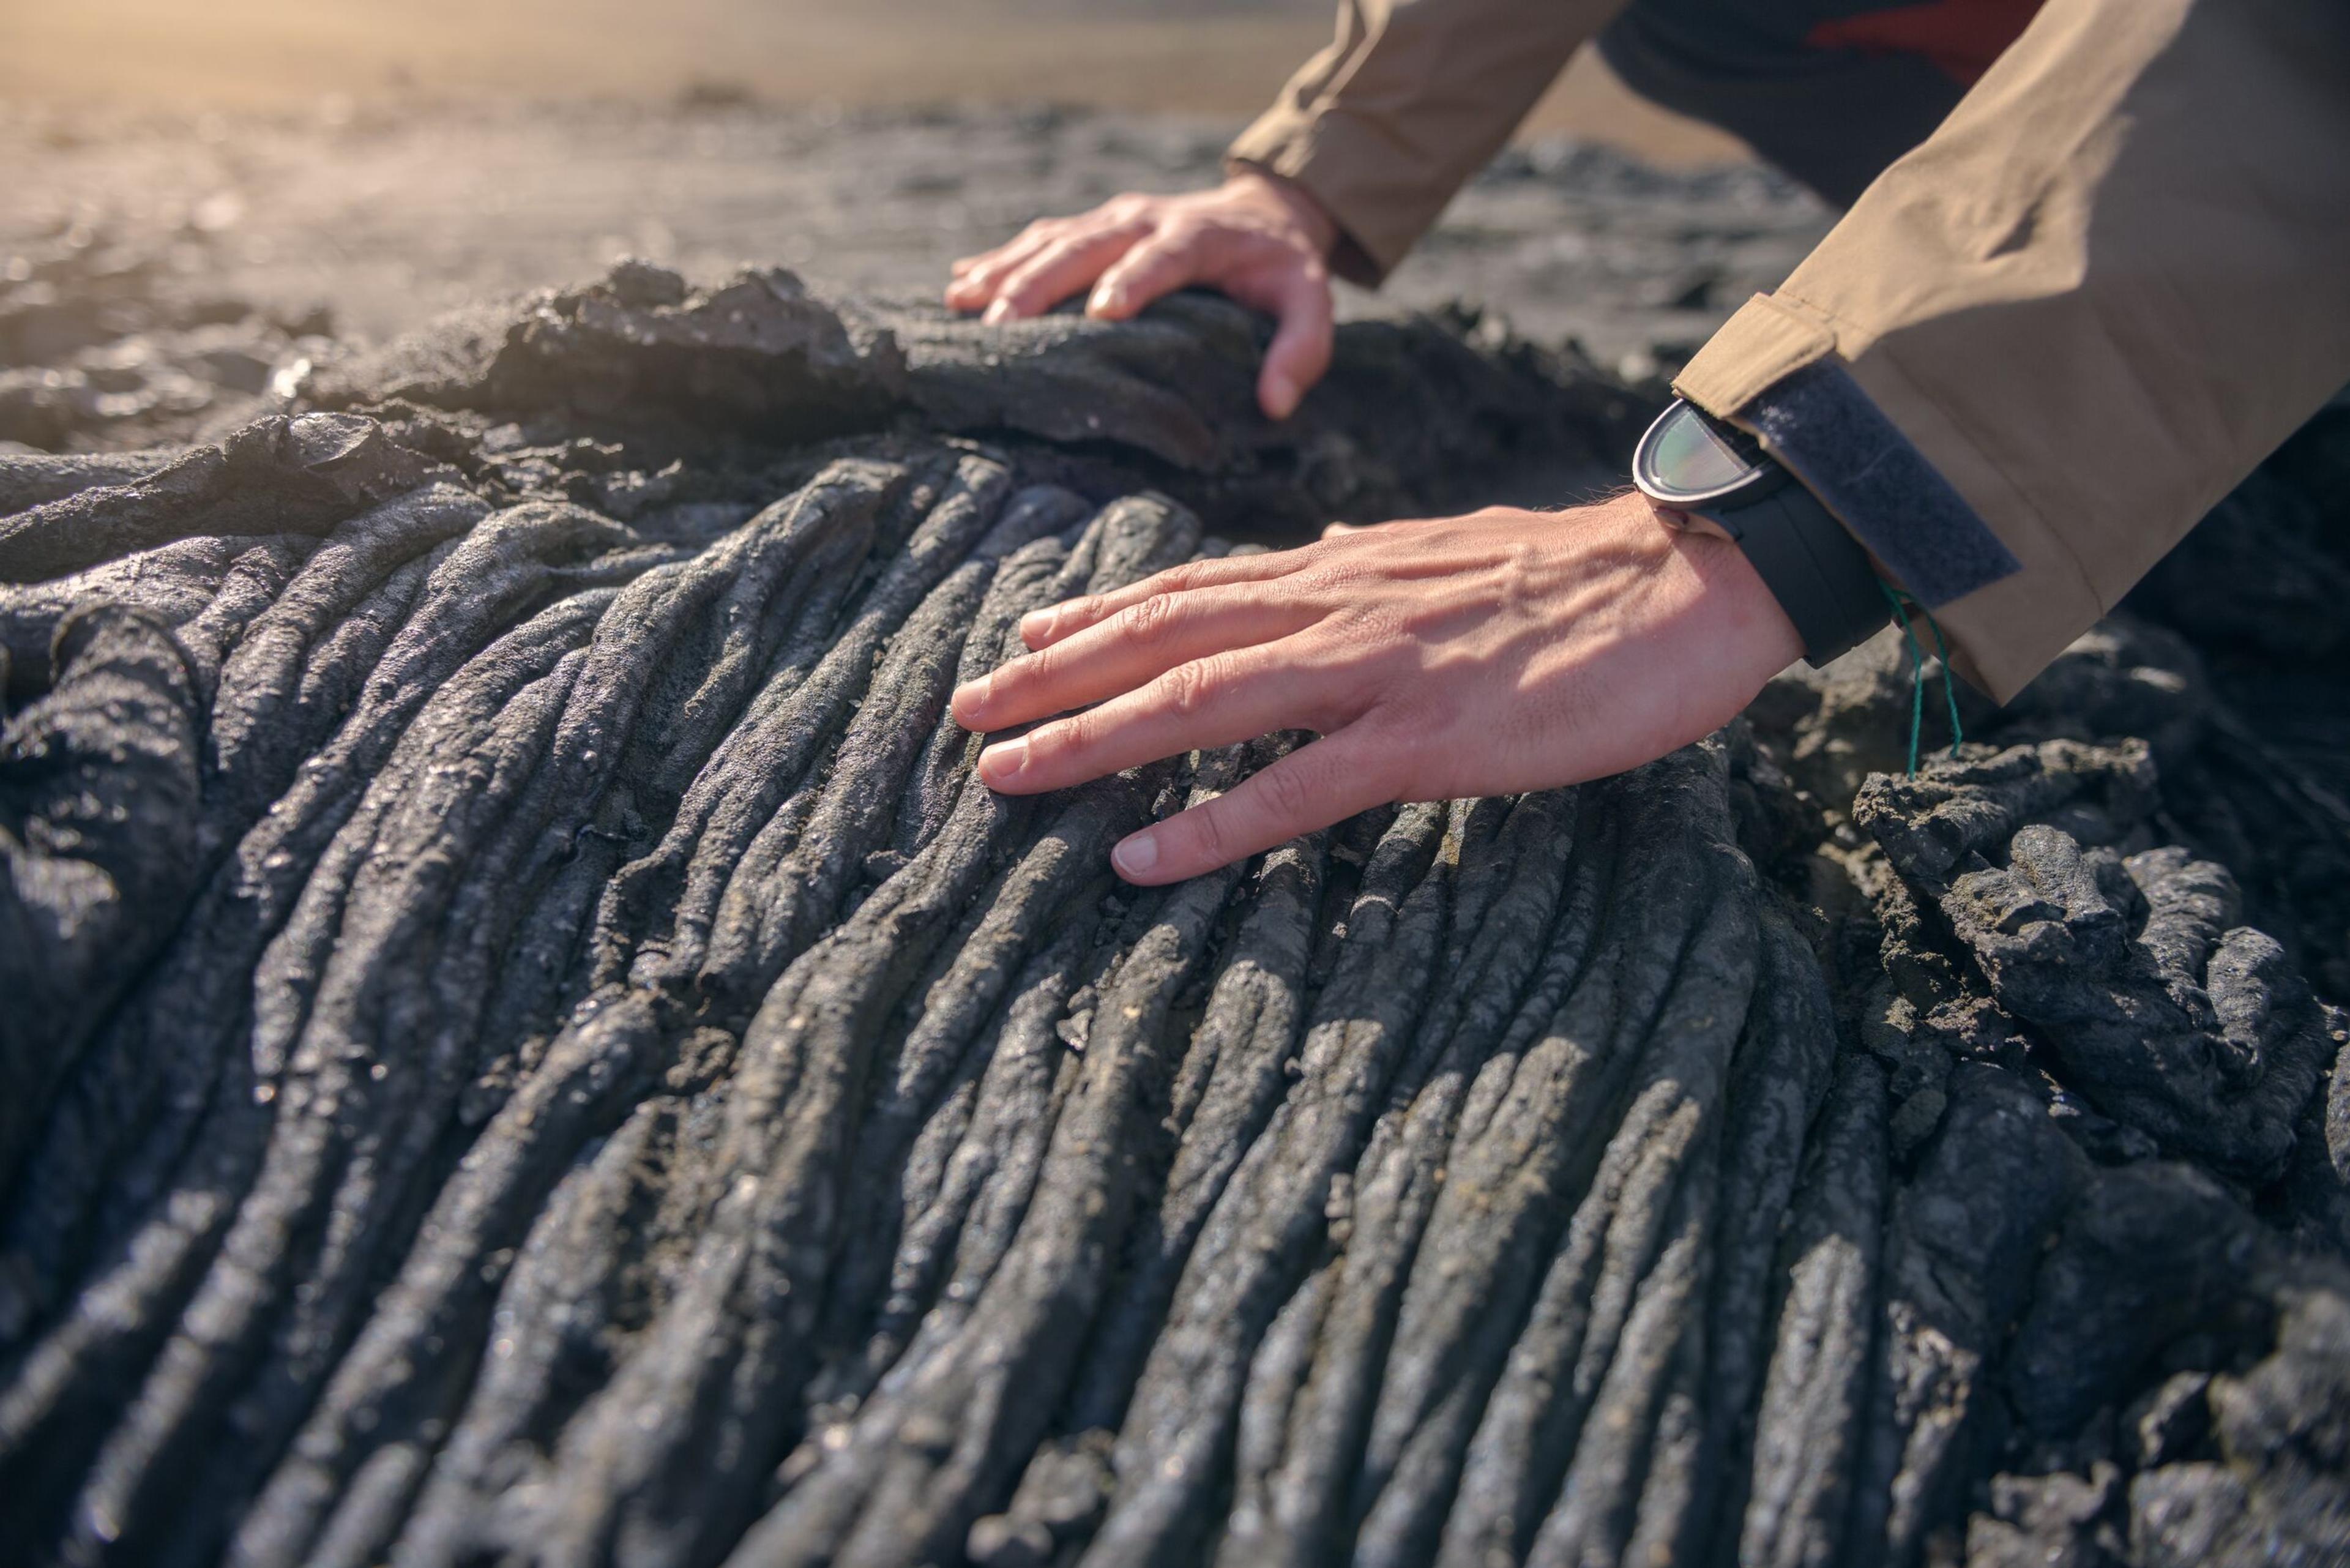 A person's hands touching the textured surface of a dark, rippled volcanic rock formation.